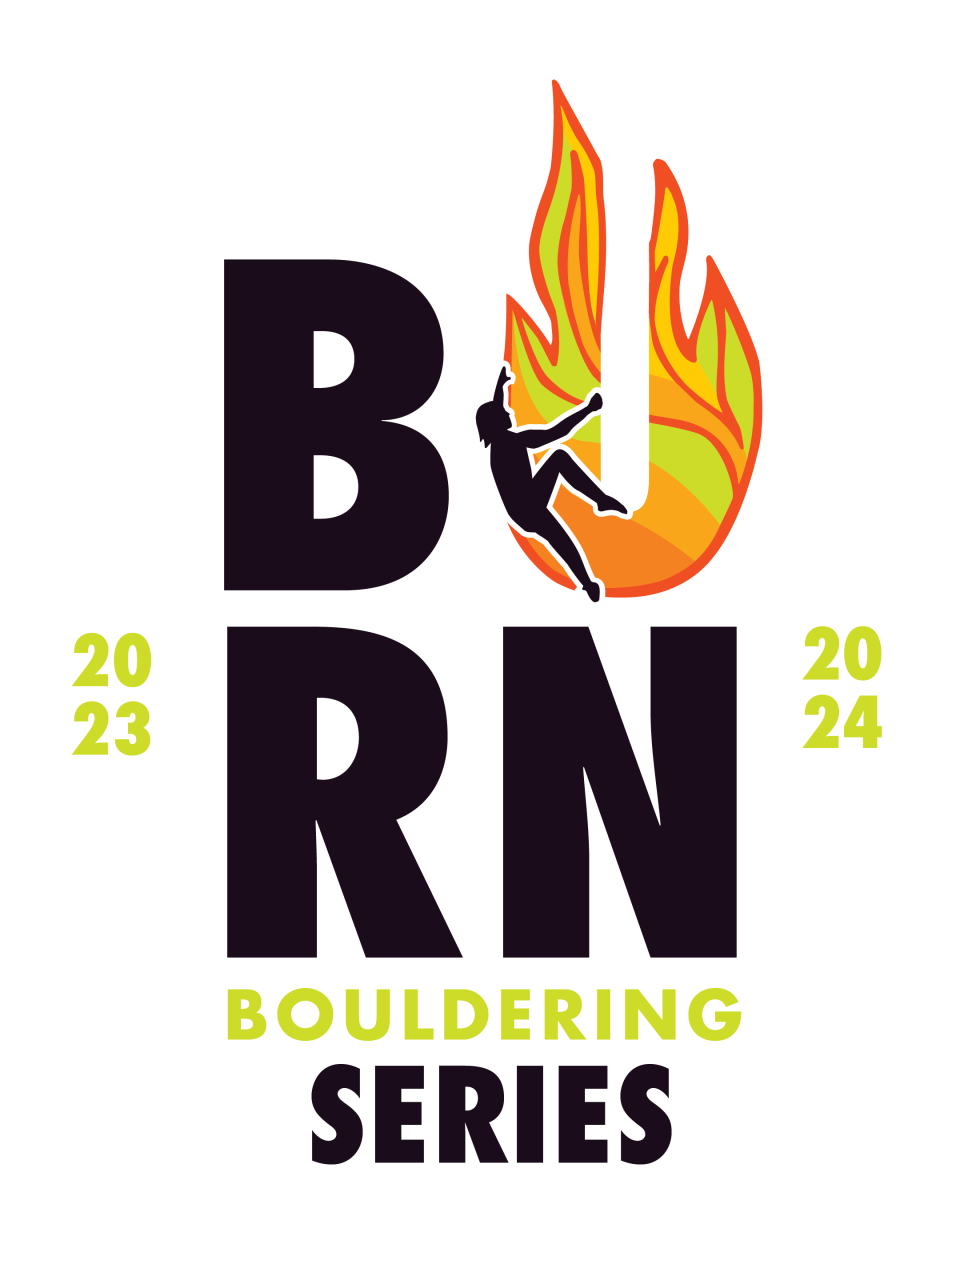 Philadelphia Rock Gyms  Burn Bouldering Series - Climbing Competitions